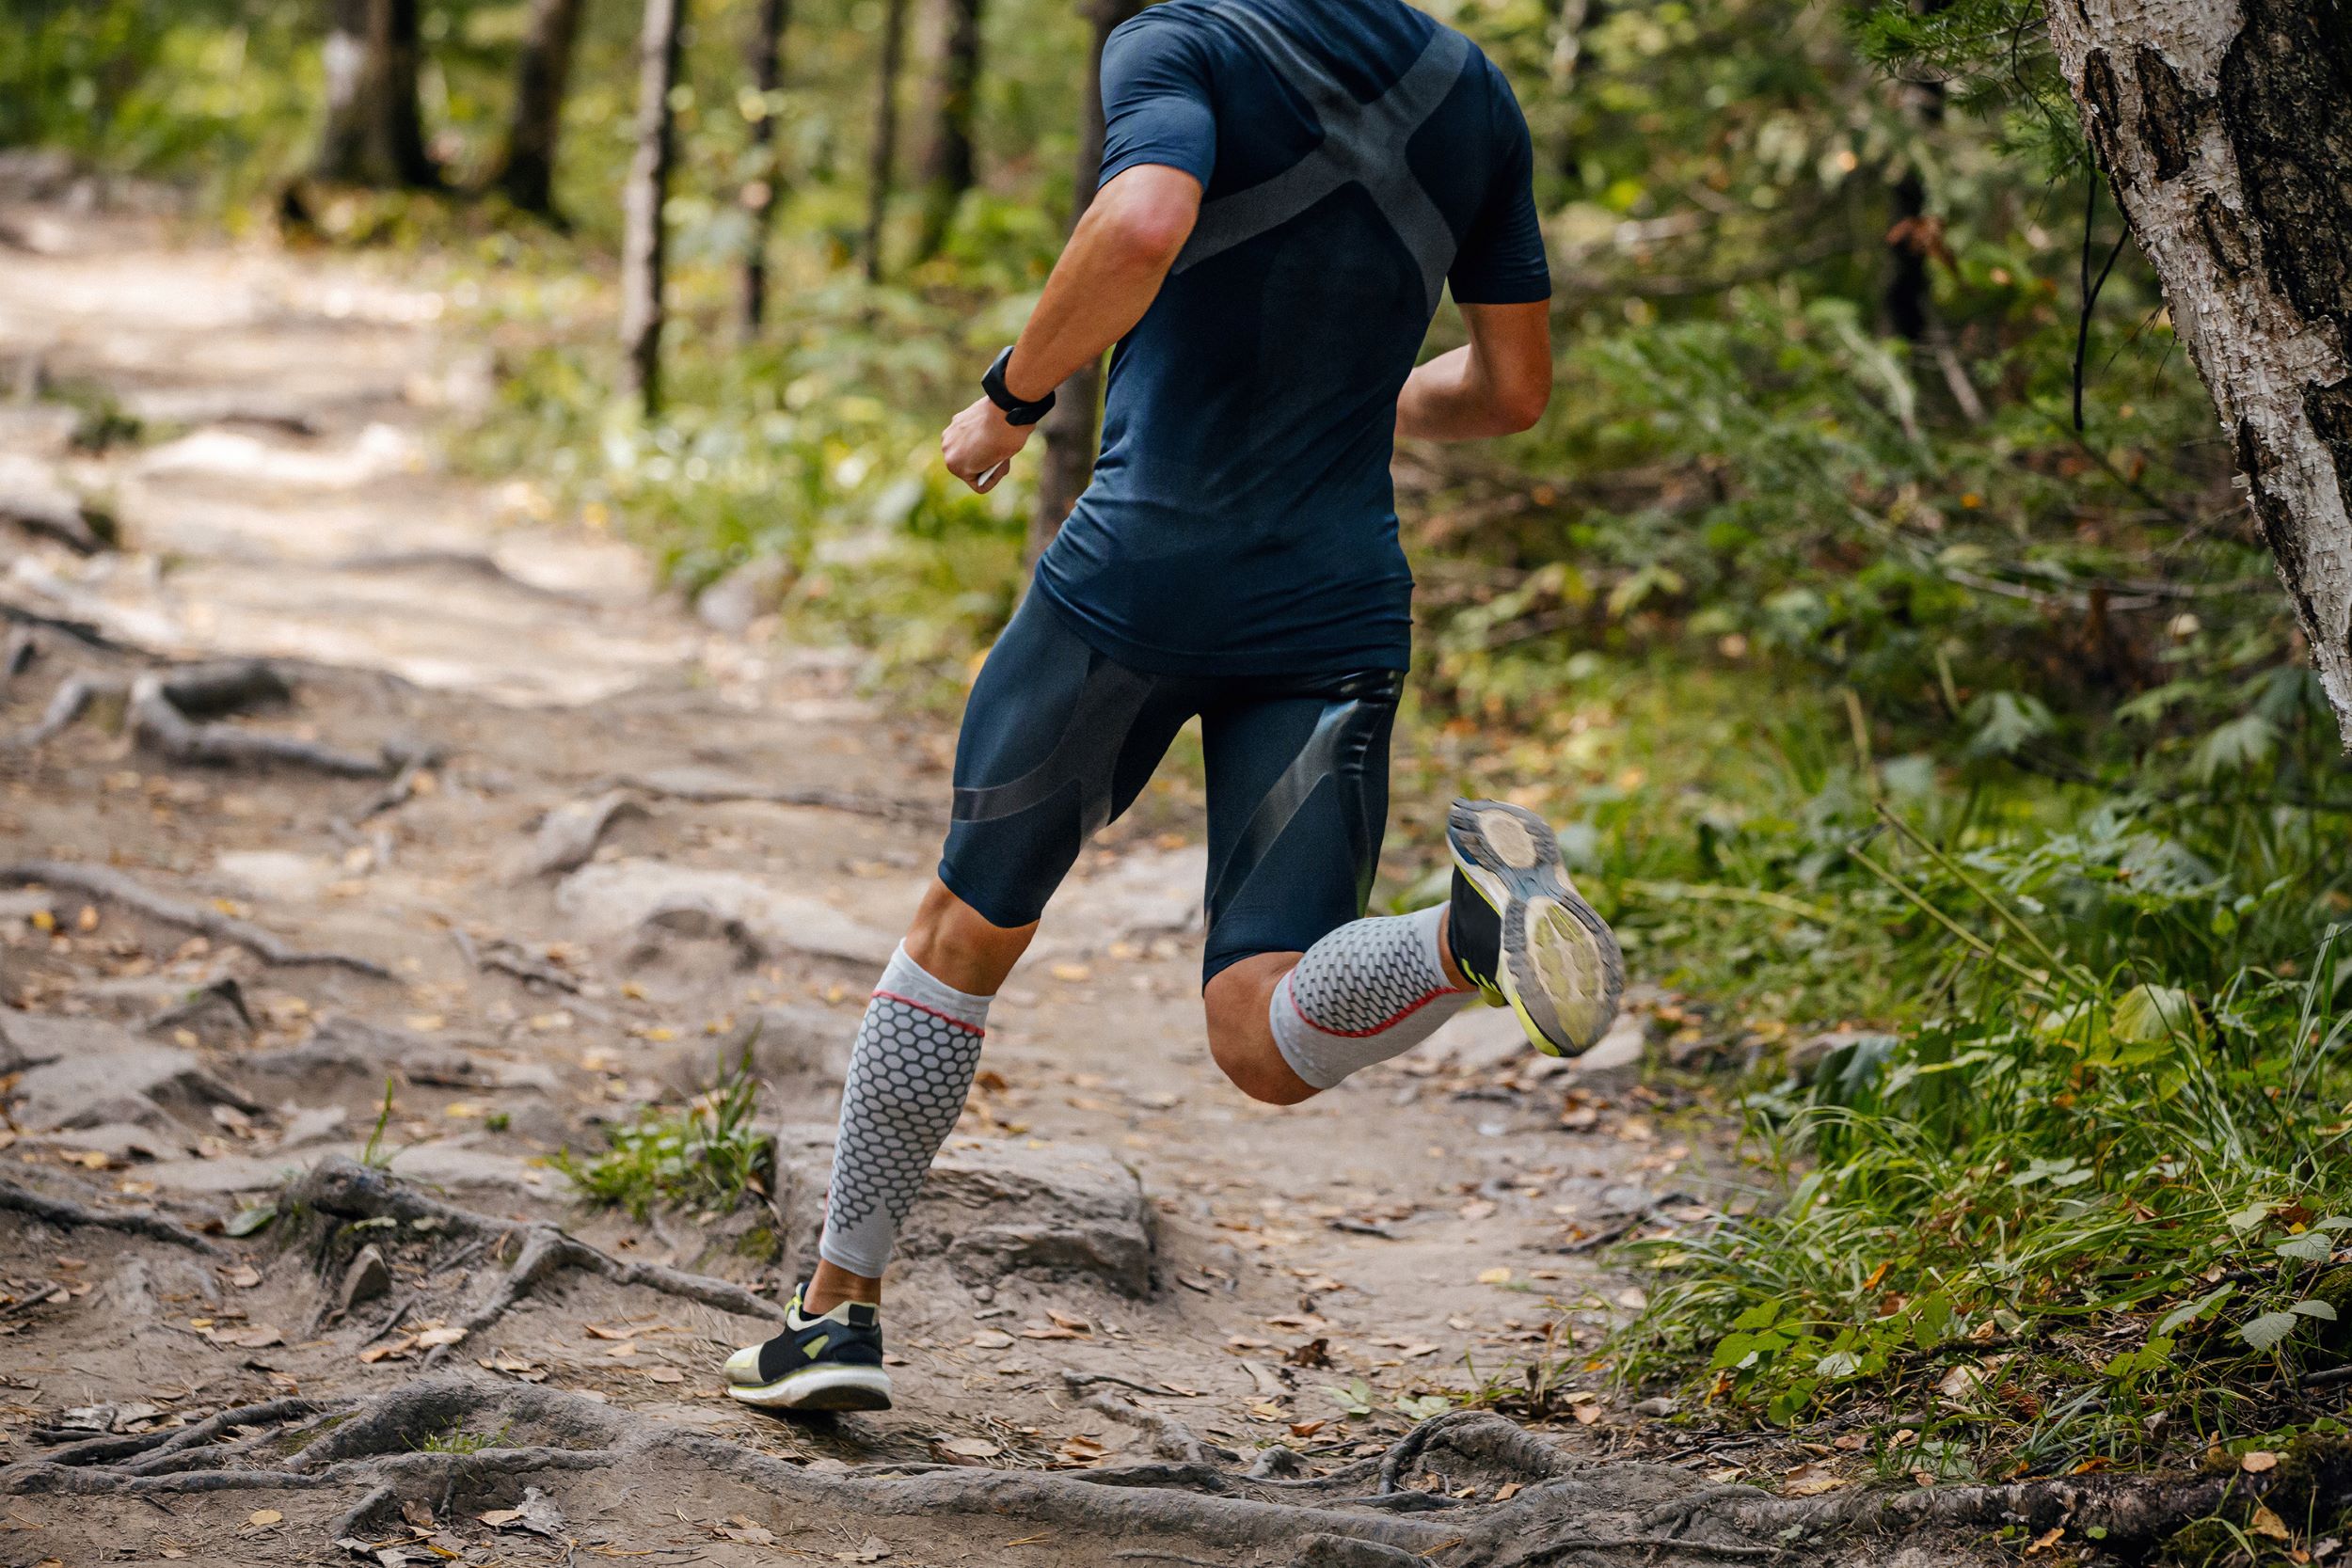 A man running on a trail in the woods.